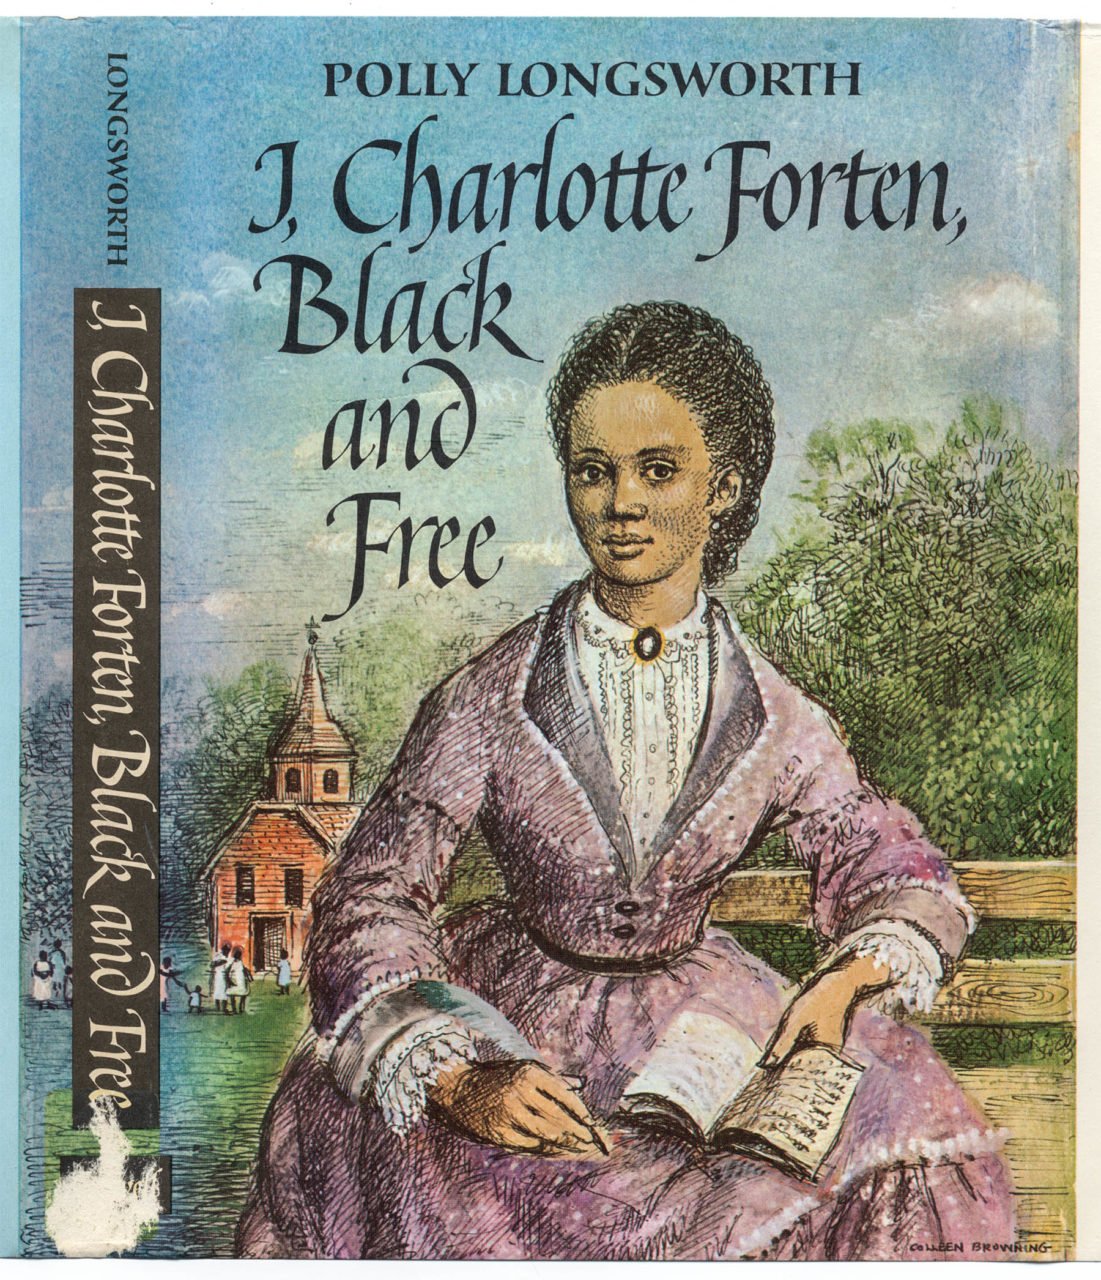 I Charlotte Forten, Black and Free by Polly Longsworth